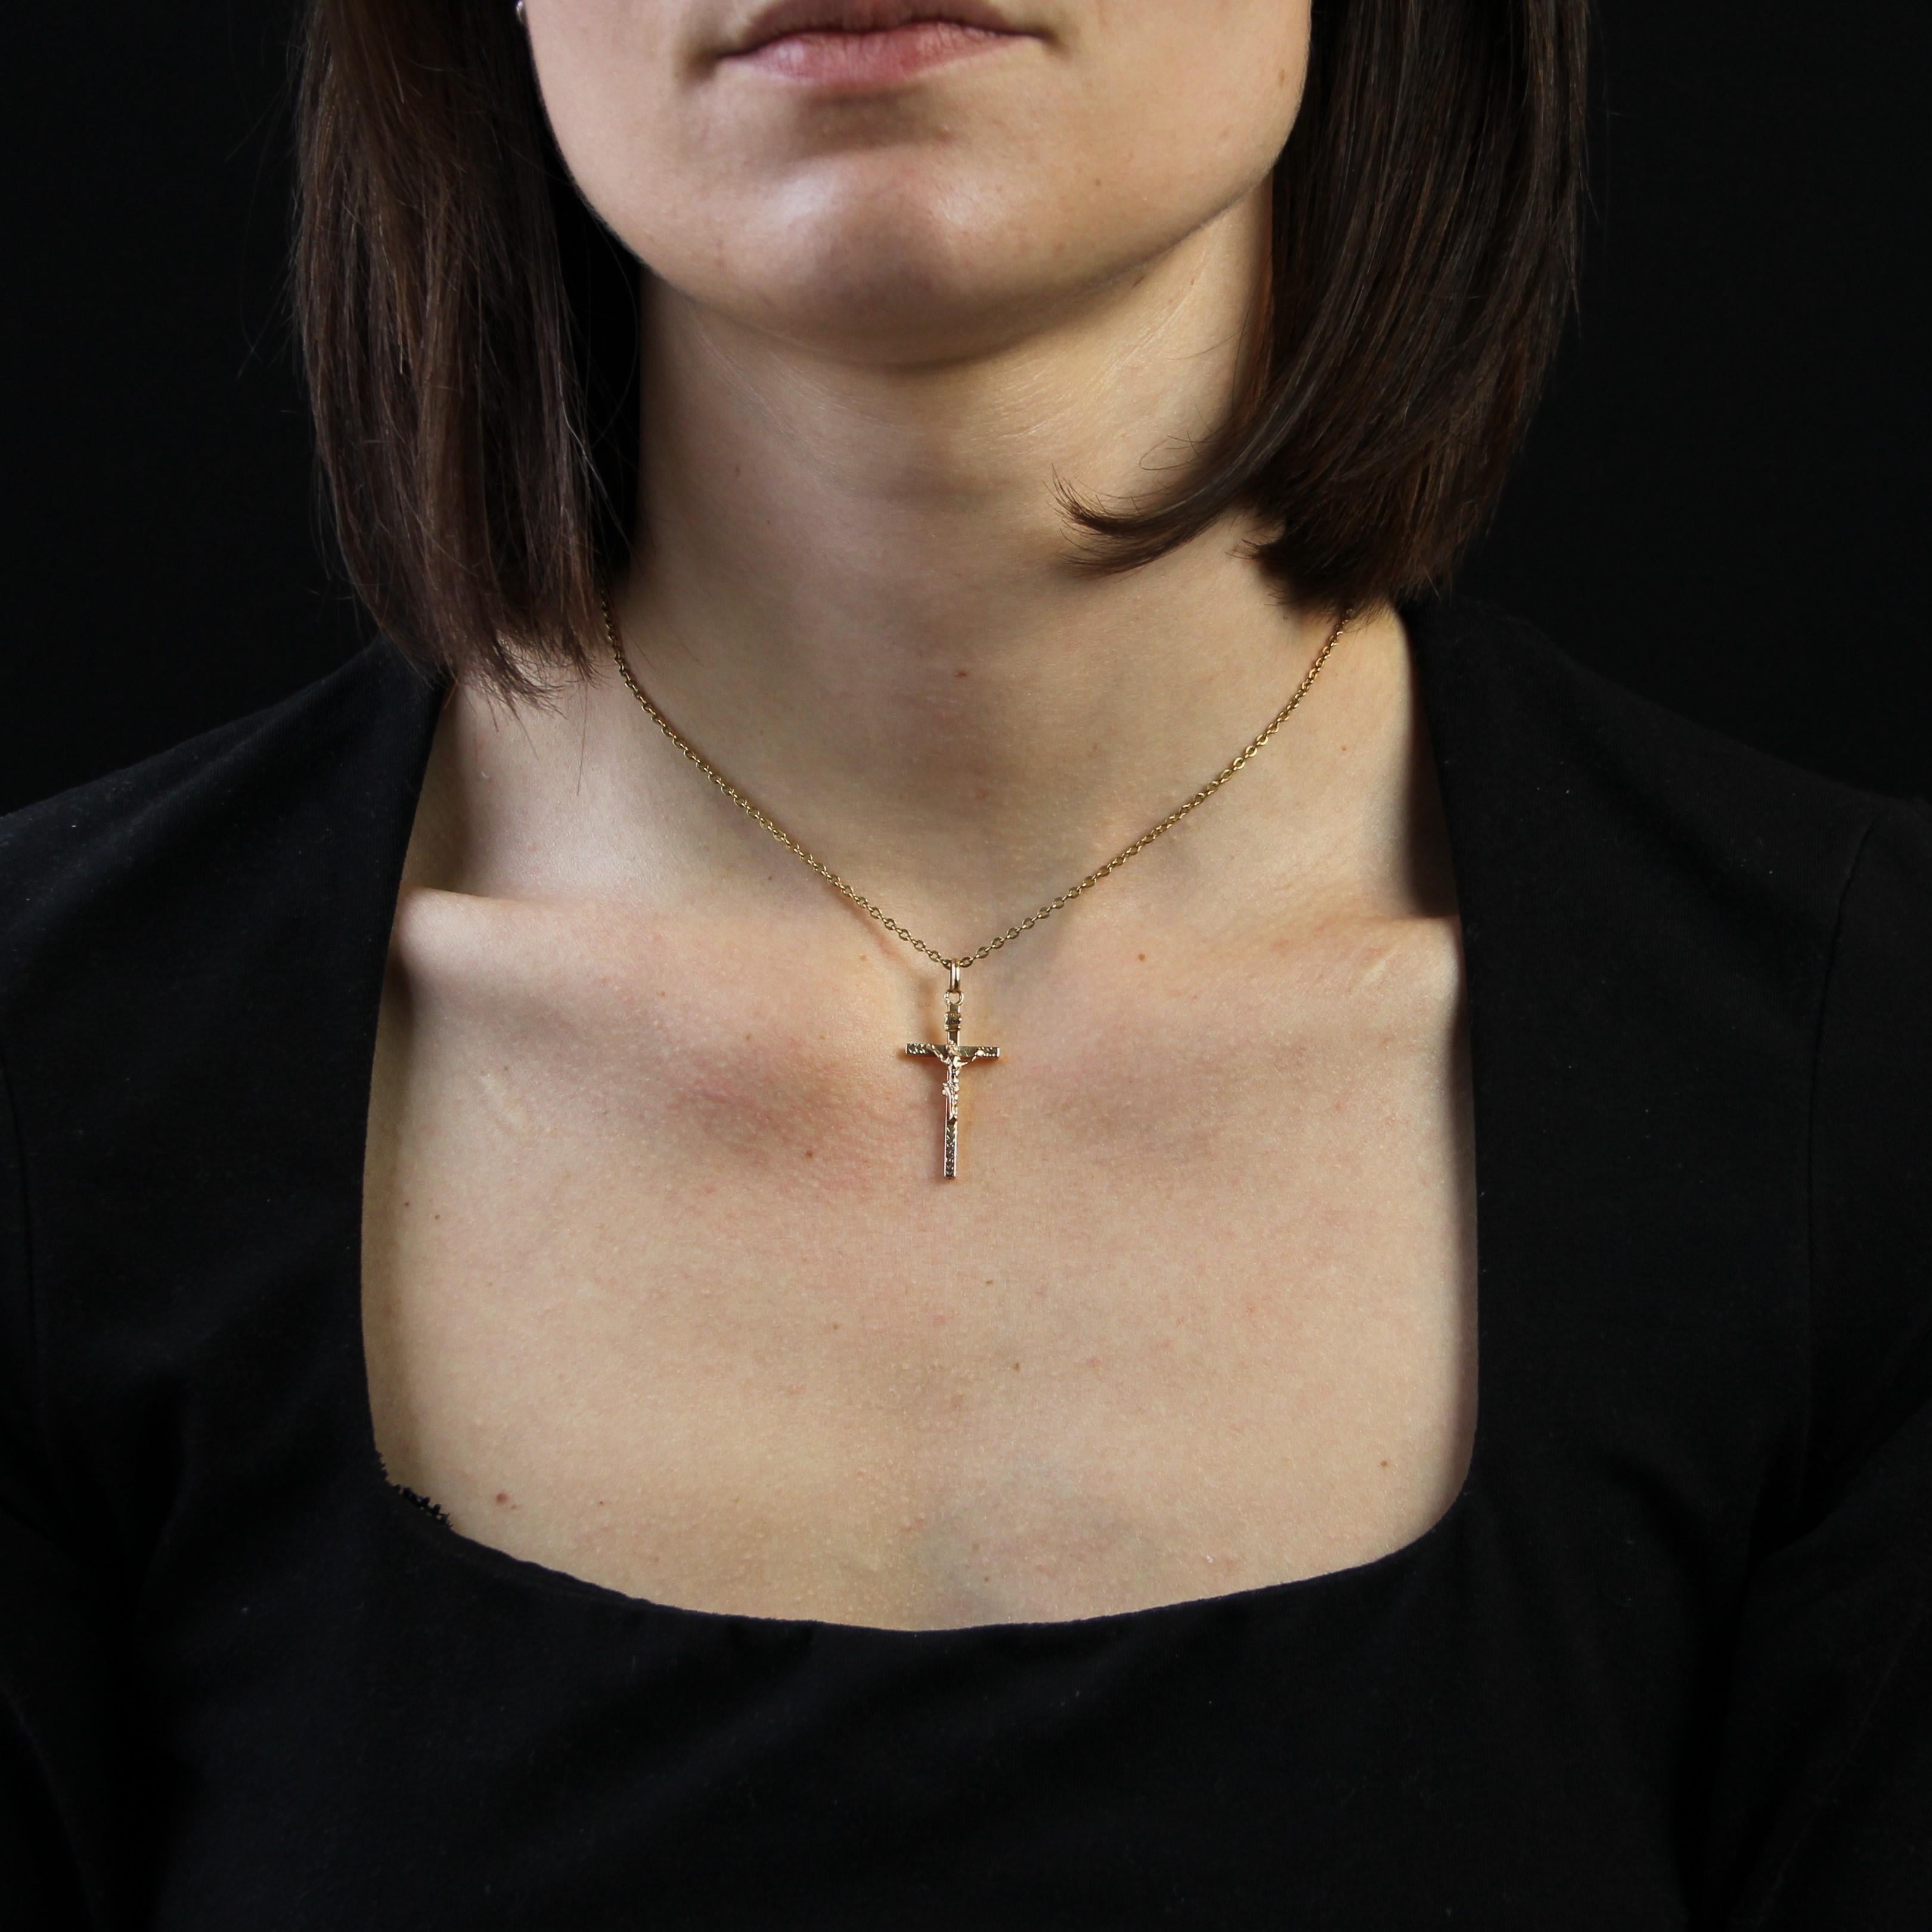 Cross in 18 karat rose gold.
Antique cross in rose gold, featuring an applied representation of Christ, surmounted by a cross motif and the acronym INRI on a banner. Each end of the cross is decorated with herringbone chasing.
Pendant sold alone